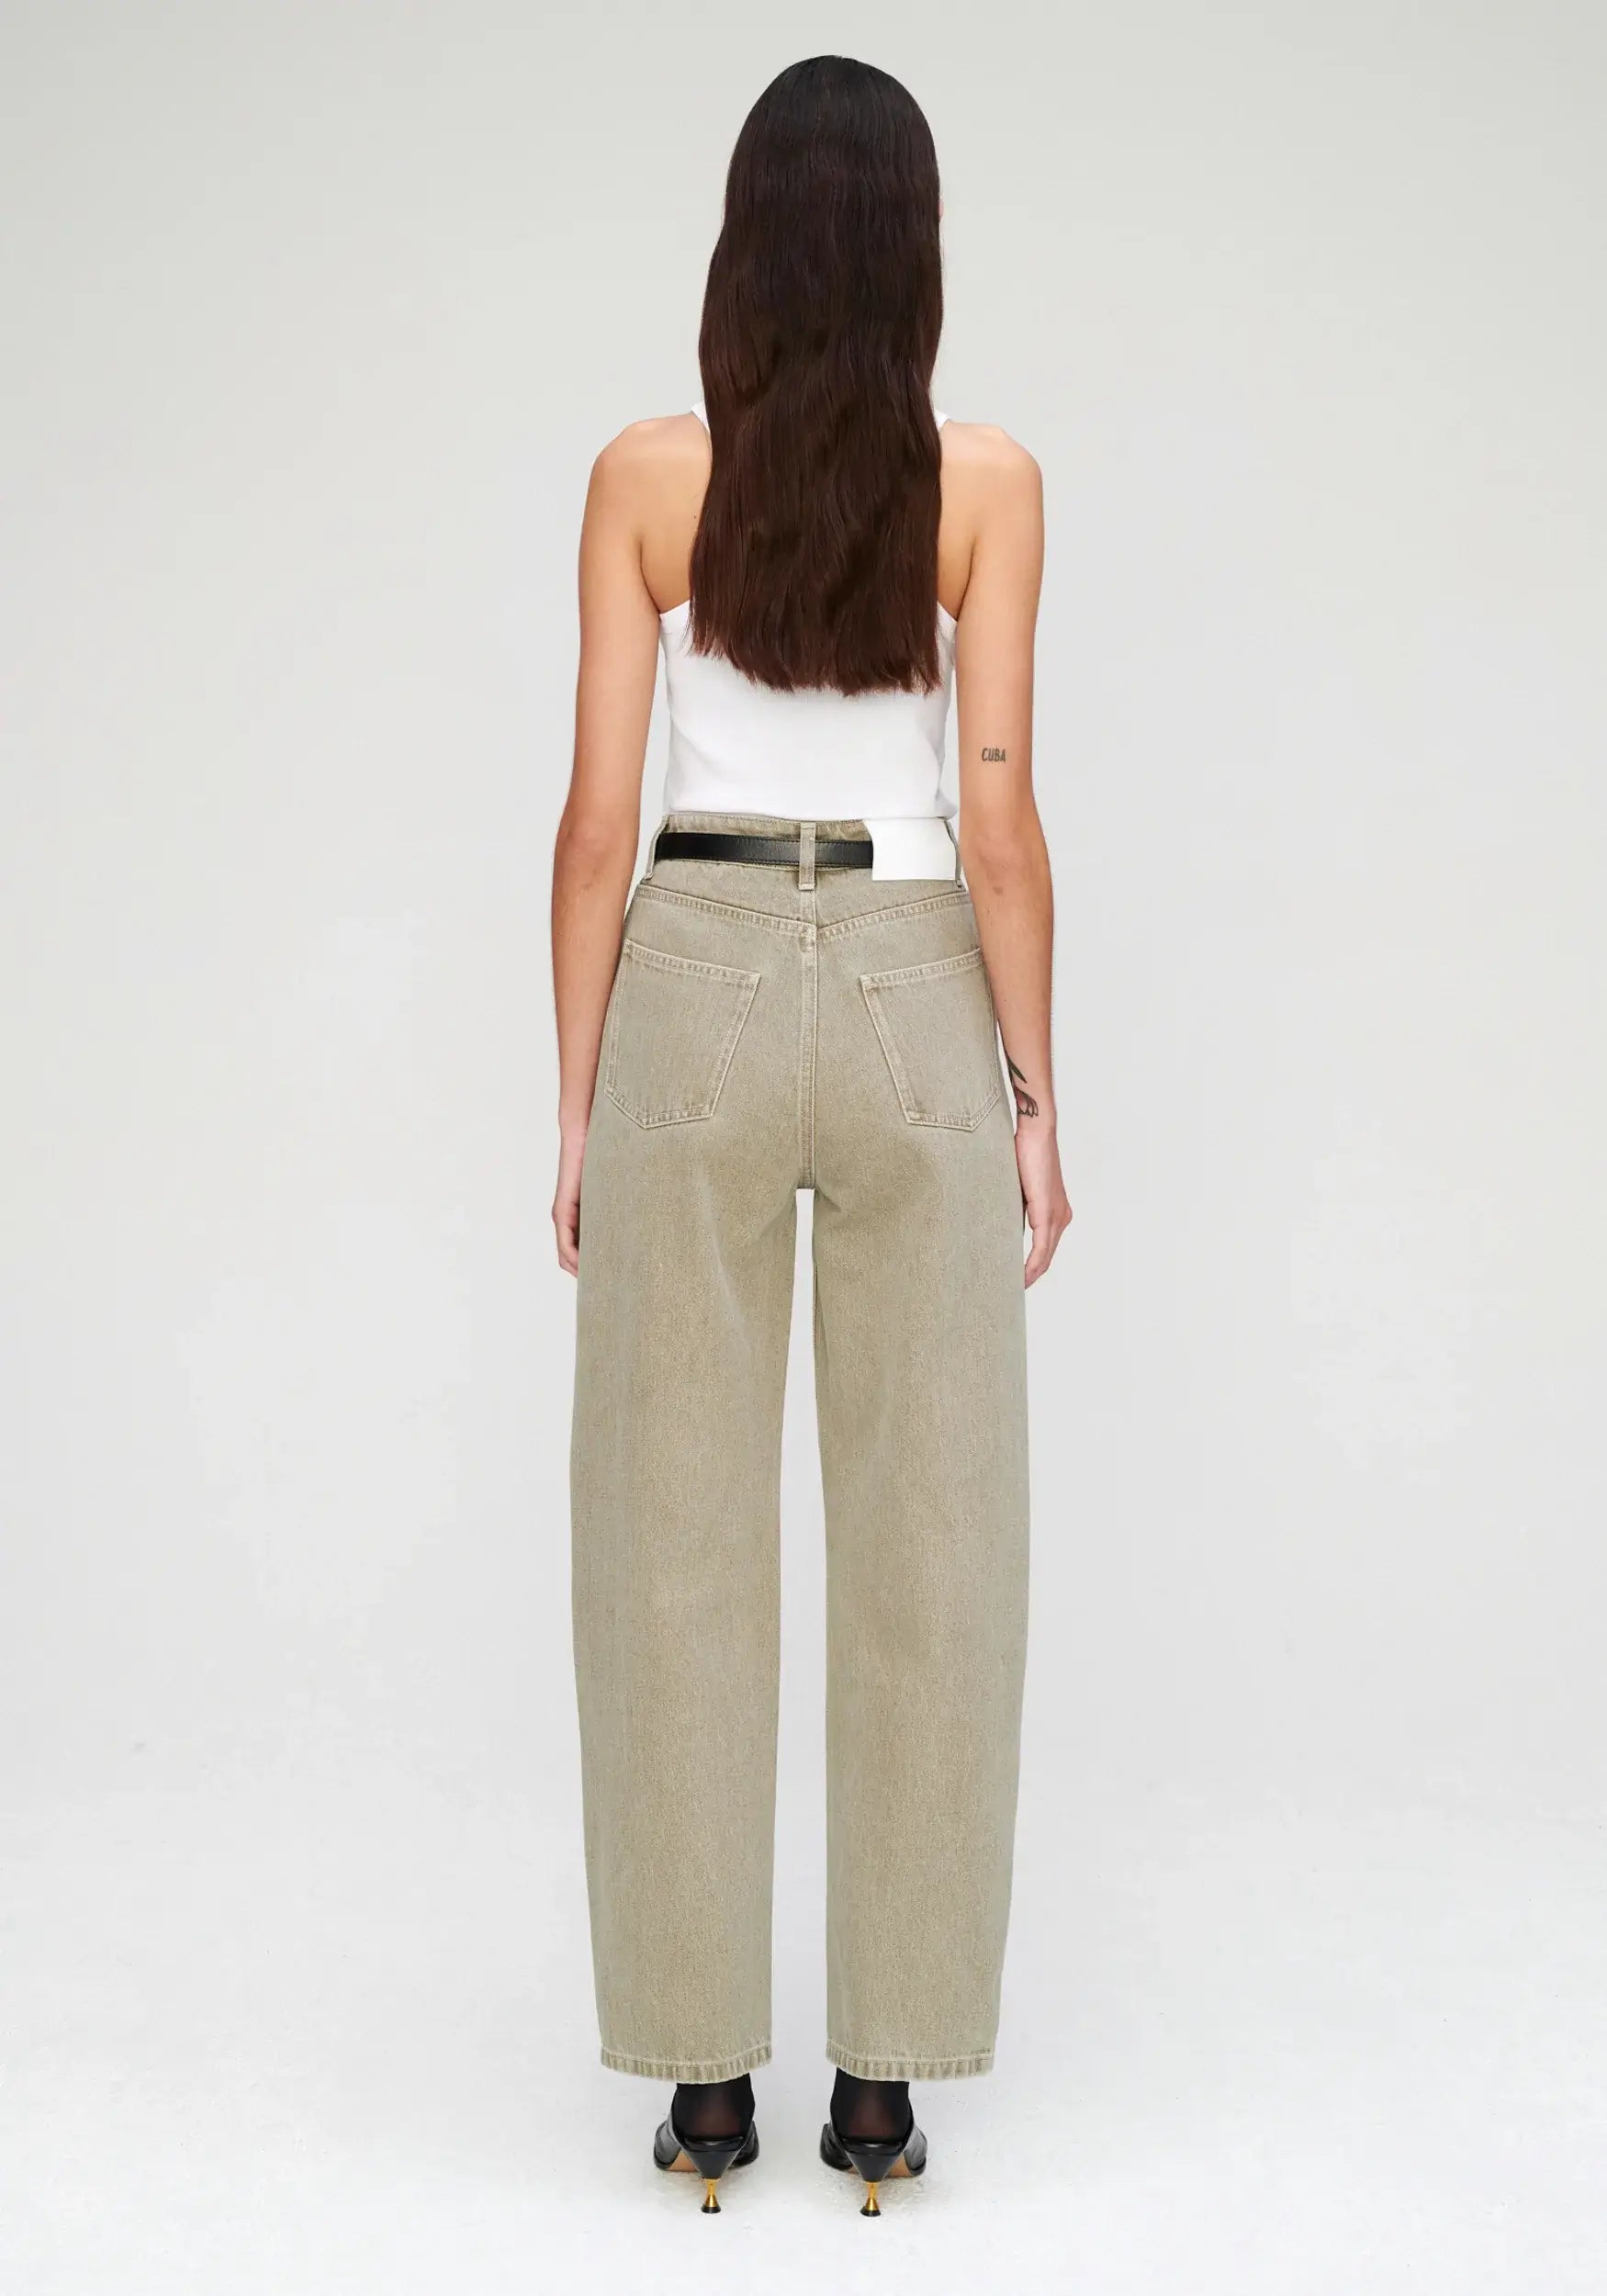 ROHE Dewi Denim in Pebbled Green from The New Trend